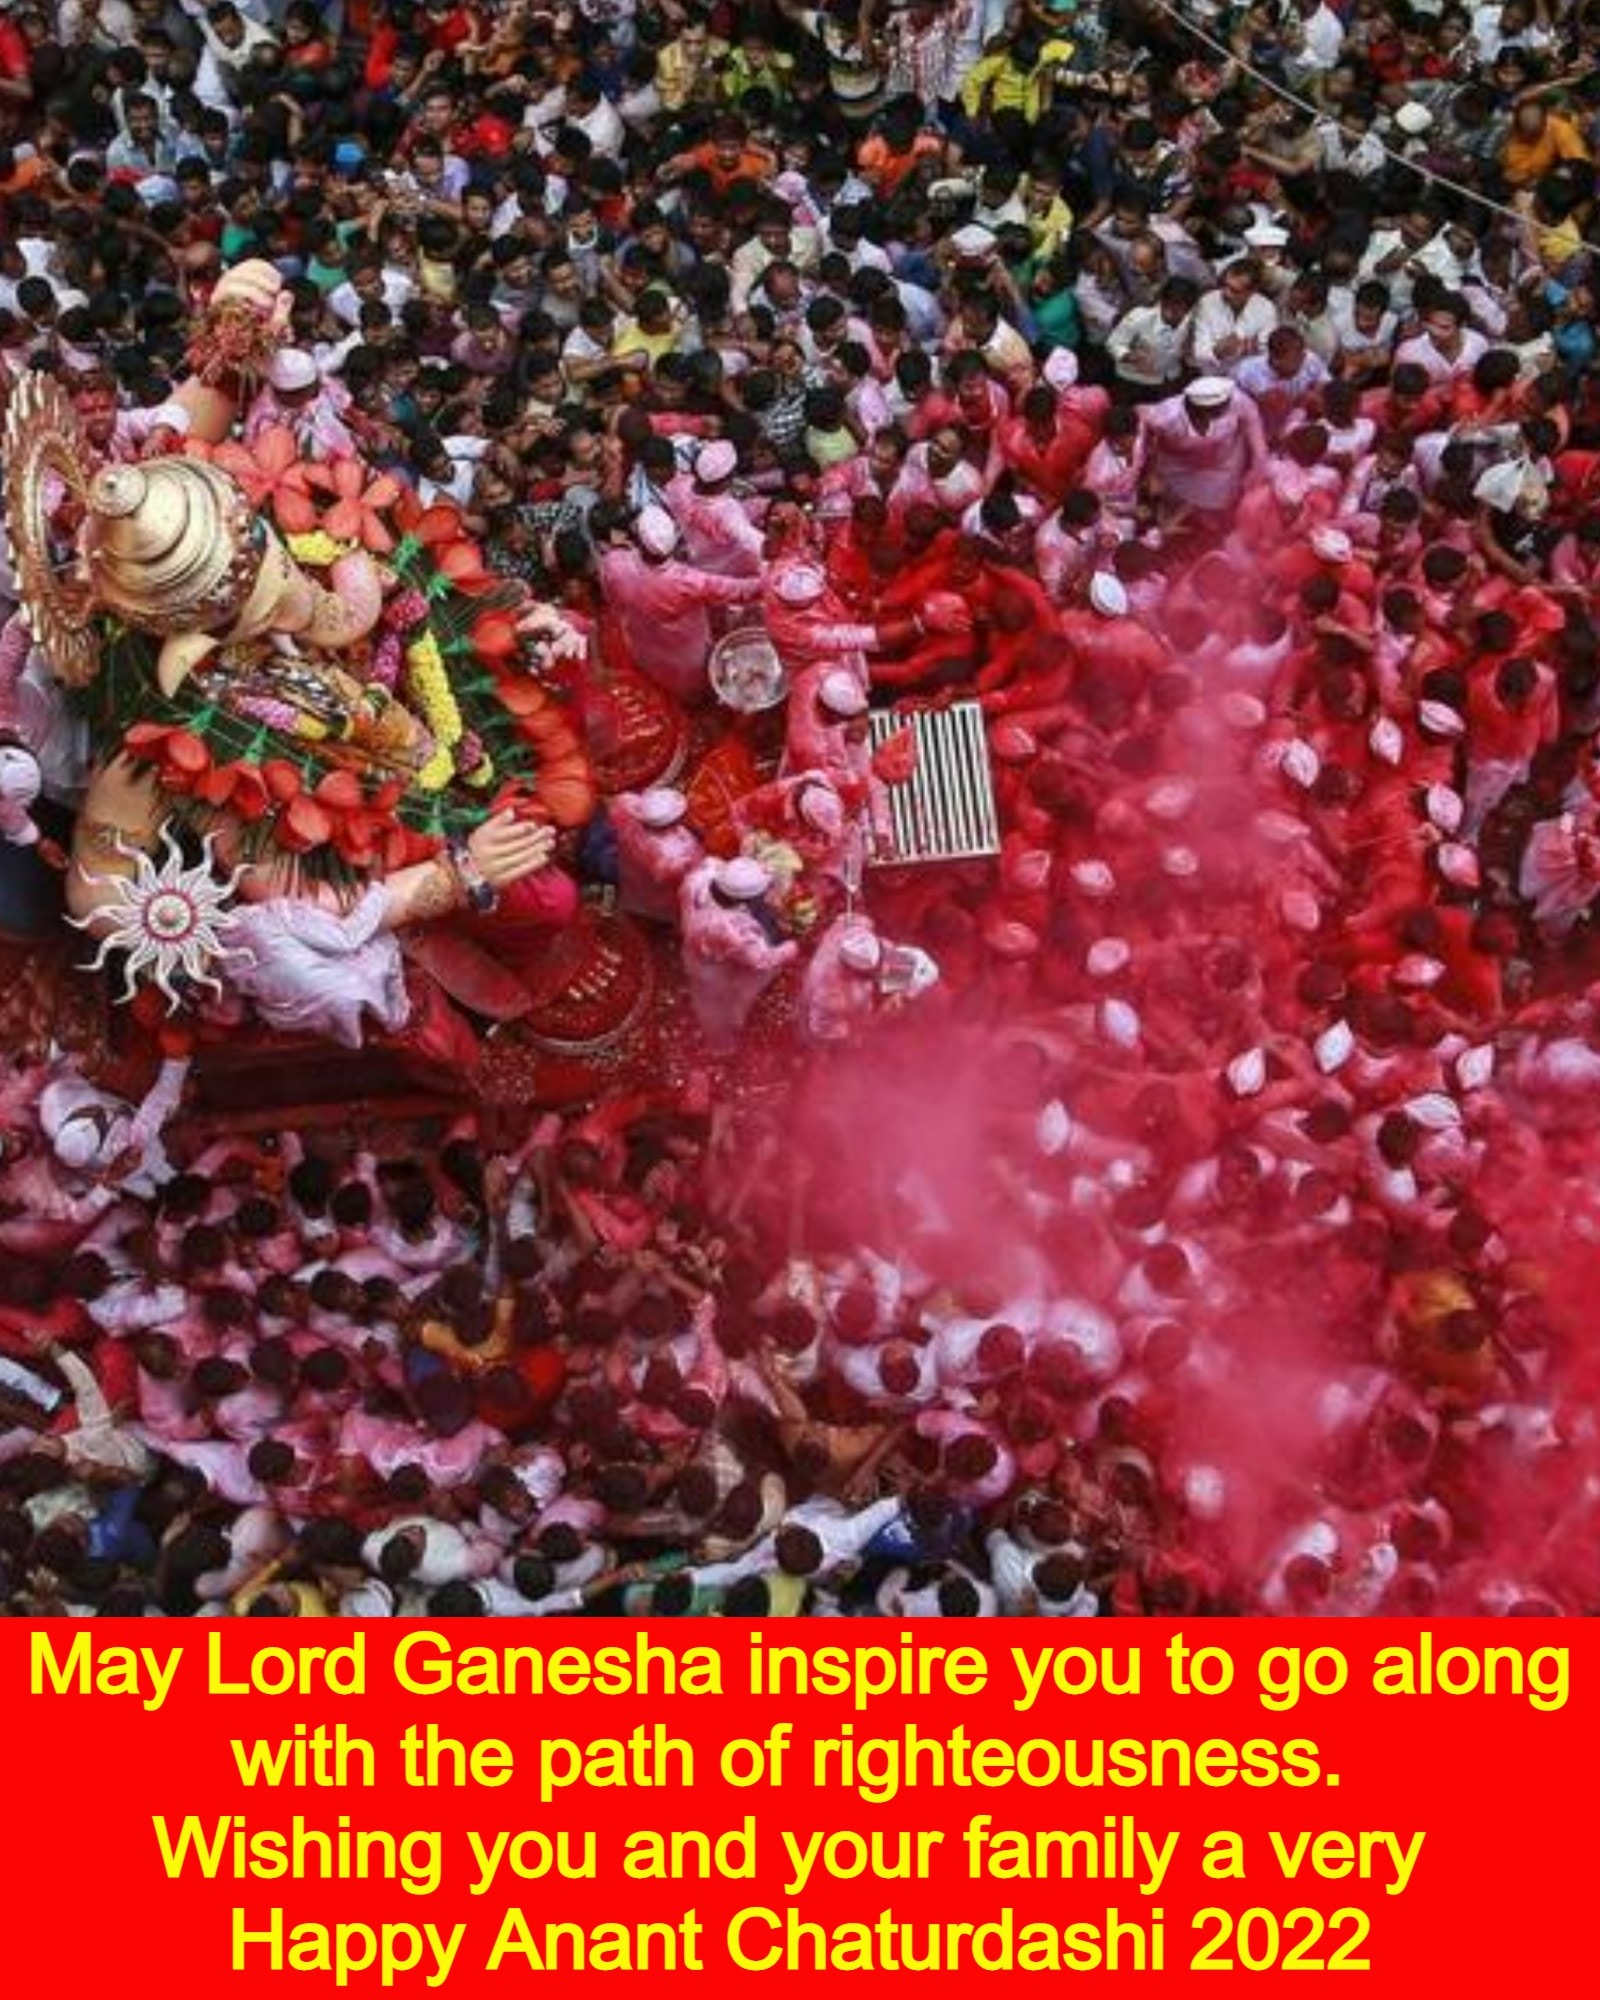 Happy Anant Chaturdashi 2022: Wishes Images, Quotes, Photos, Pics, Facebook SMS and Messages to share with your loved ones. (Image: Shutterstock) 